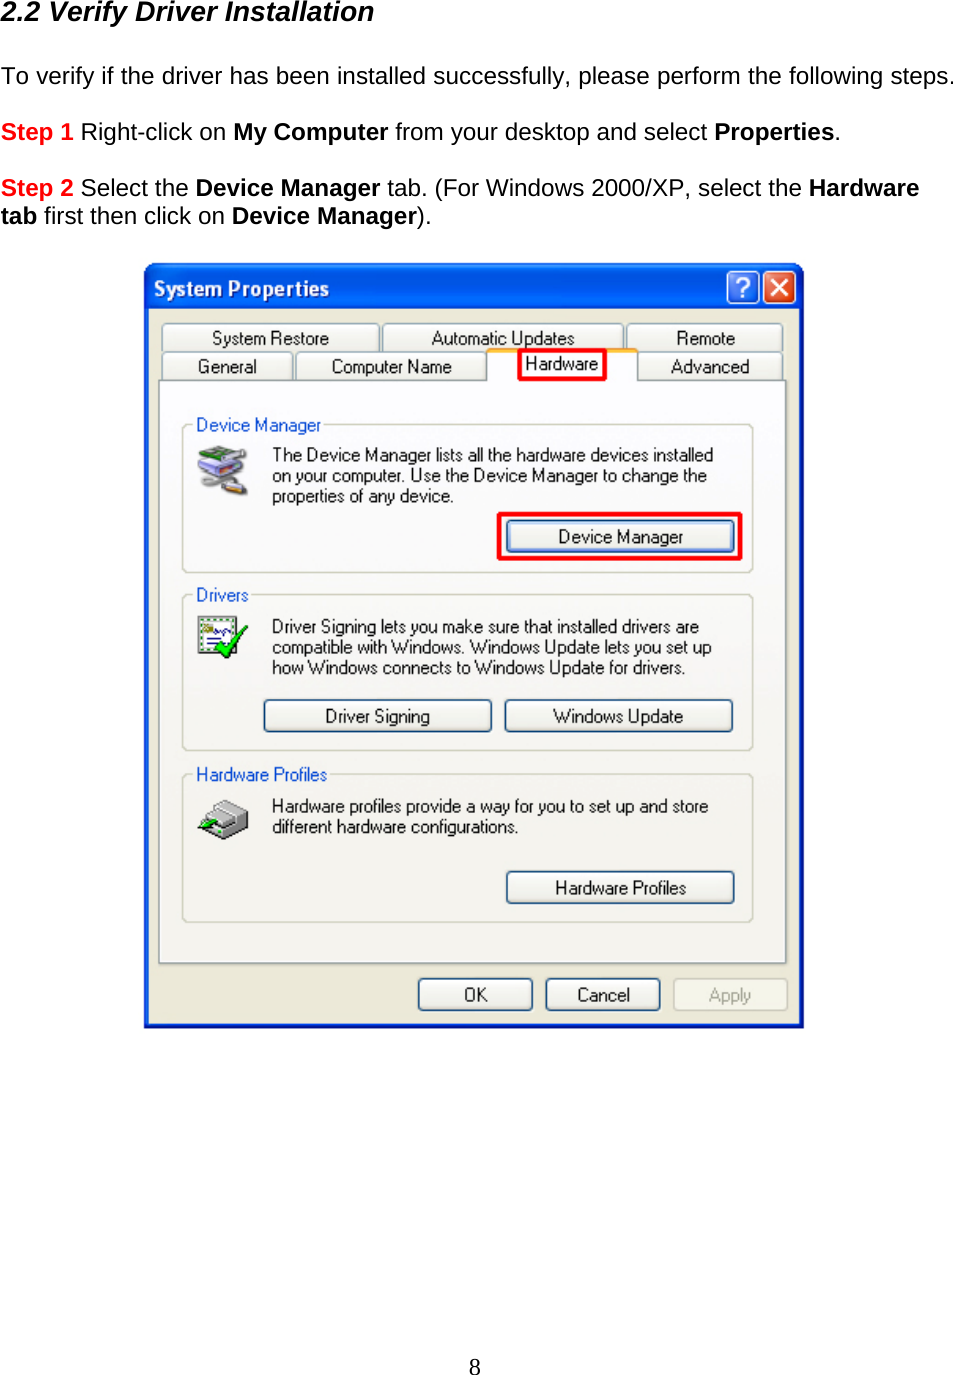 8 2.2 Verify Driver Installation  To verify if the driver has been installed successfully, please perform the following steps.  Step 1 Right-click on My Computer from your desktop and select Properties.  Step 2 Select the Device Manager tab. (For Windows 2000/XP, select the Hardware tab first then click on Device Manager).            